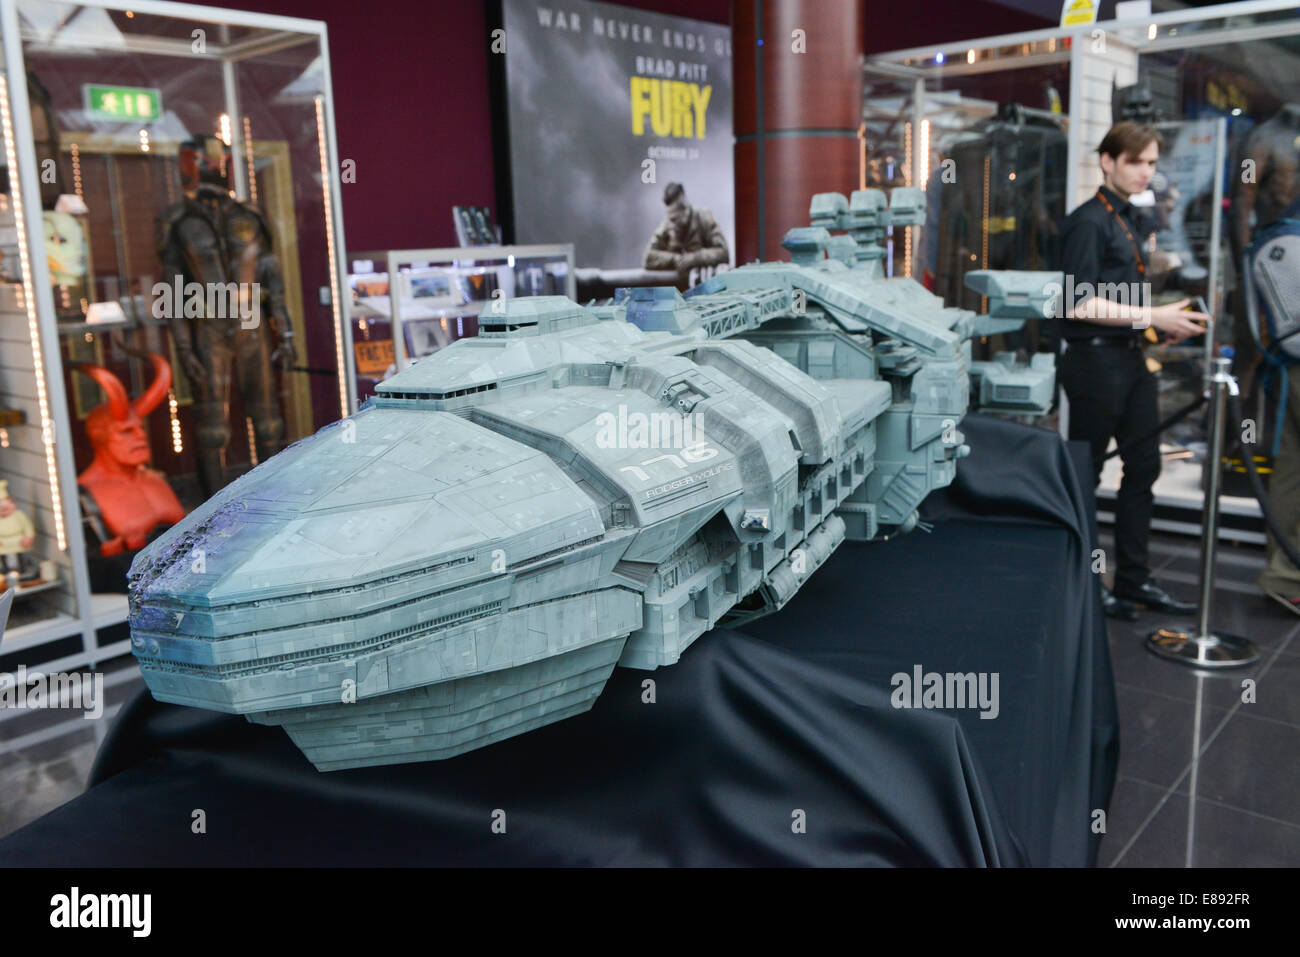 Westfield, Shepherds Bush, London, UK. 2nd October 2014. An exhibition of collectable movie memorabilia from classic movies that will be auctioned, films include; Star Wars, The Shining, Batman etc. The auction takes place on the 16th October. Credit:  Matthew Chattle/Alamy Live News Stock Photo